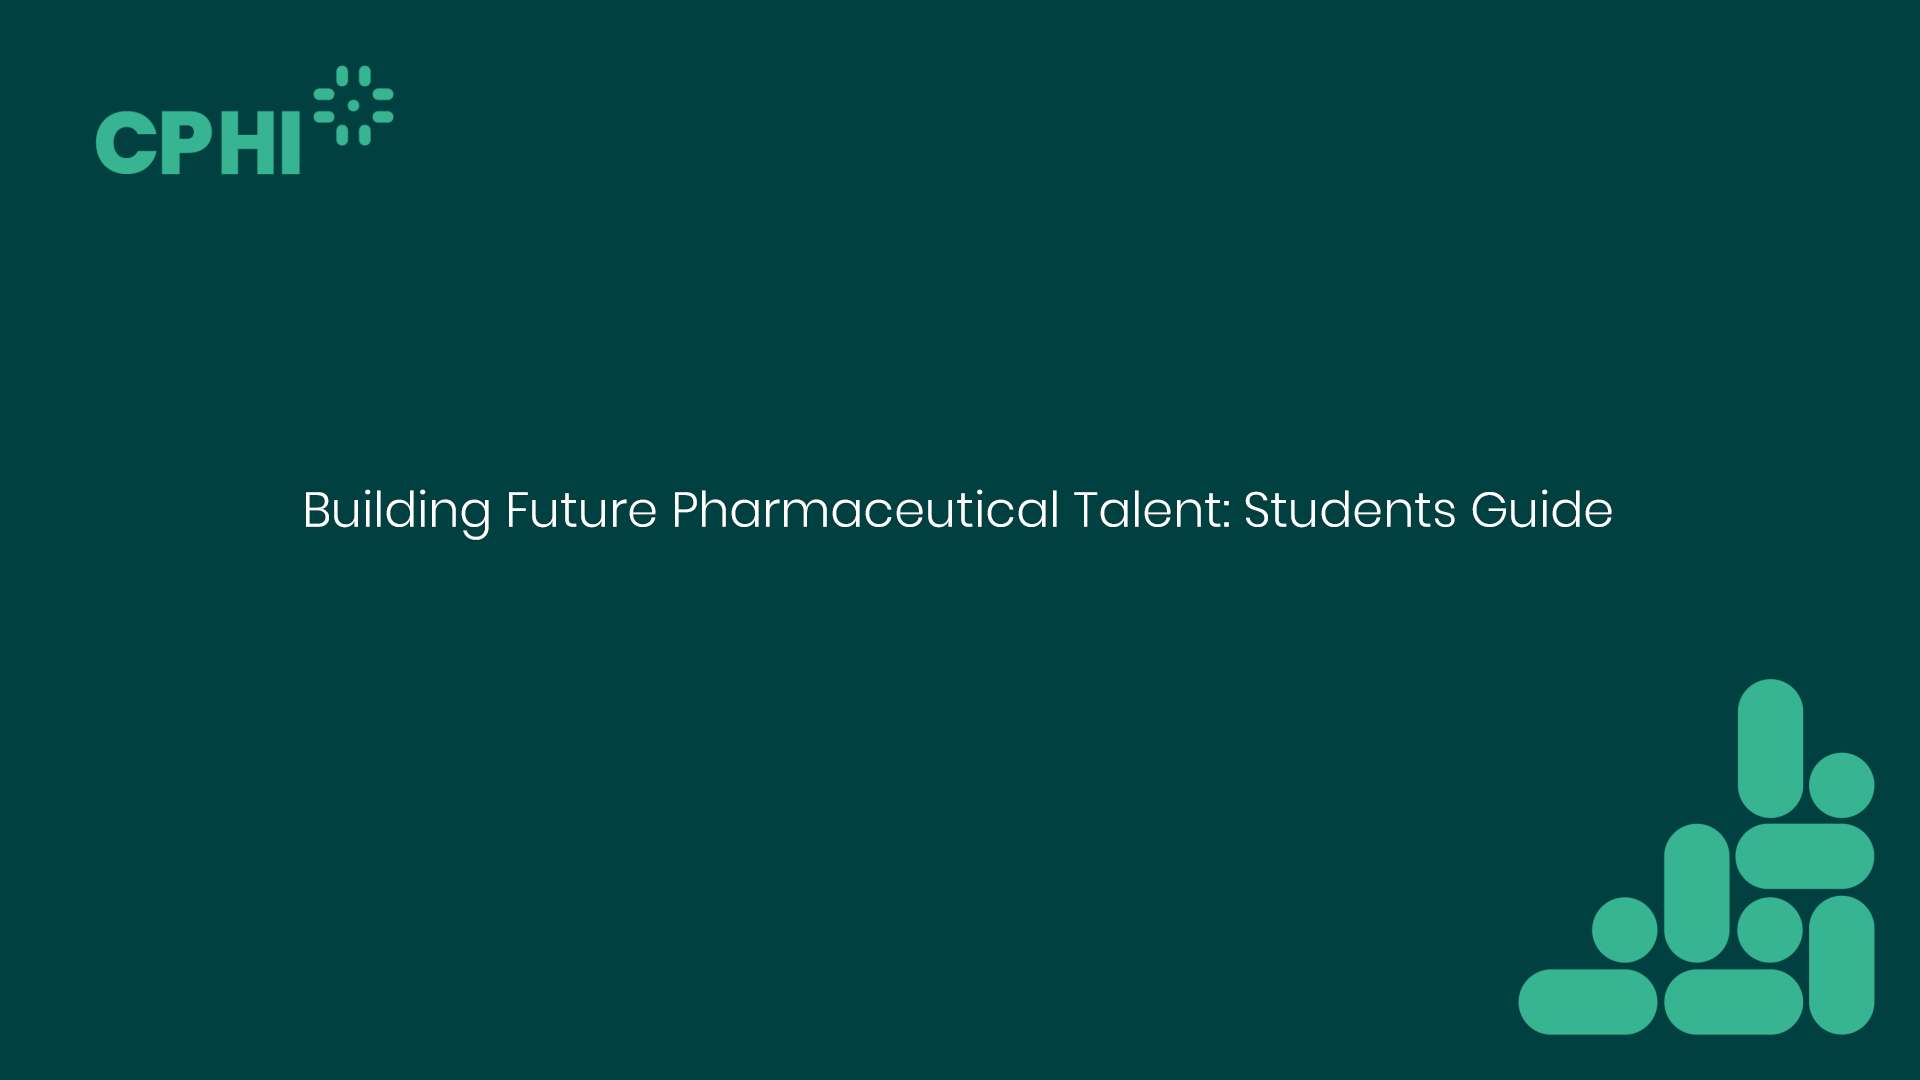 Building Future Pharmaceutical Talent: Students Guide